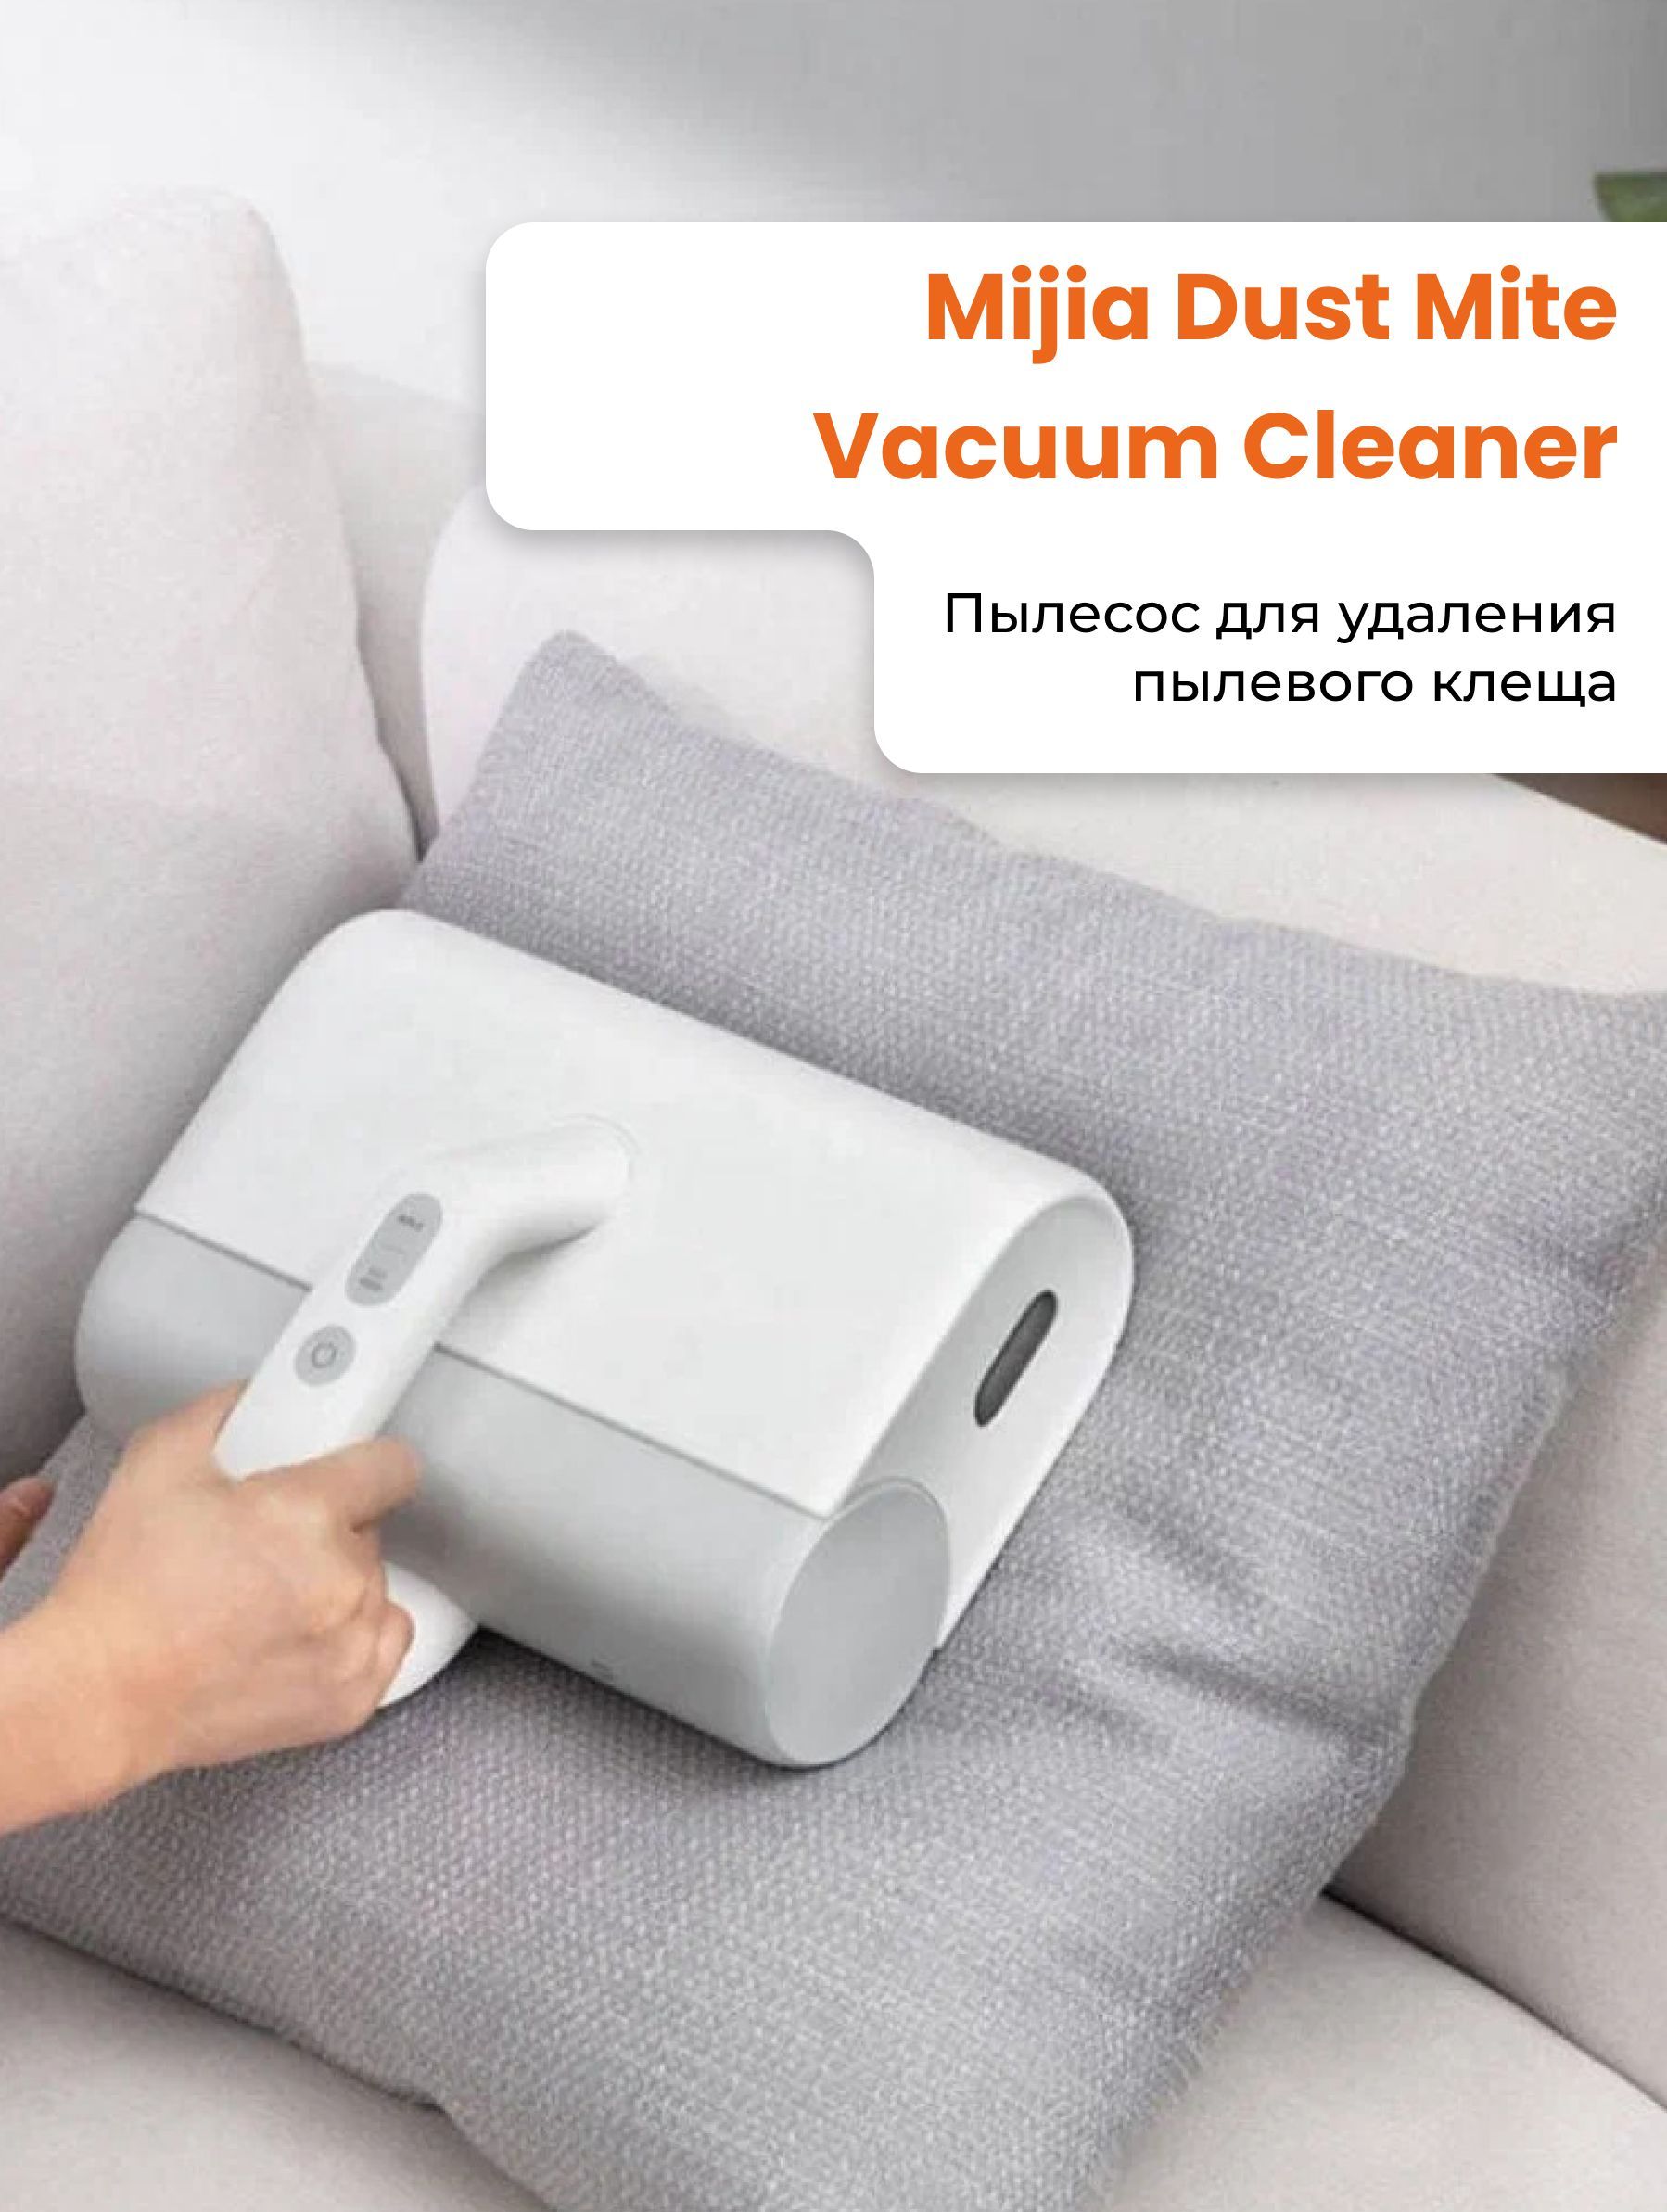 Xiaomi dust mite vacuum cleaner mjcmy01dy. Xiaomi mjcmy01dy. Пылесос Xiaomi (mjcmy01dy). Xiaomi Dust Mite Vacuum. Xiaomi Mijia Dust Mite Vacuum Cleaner.